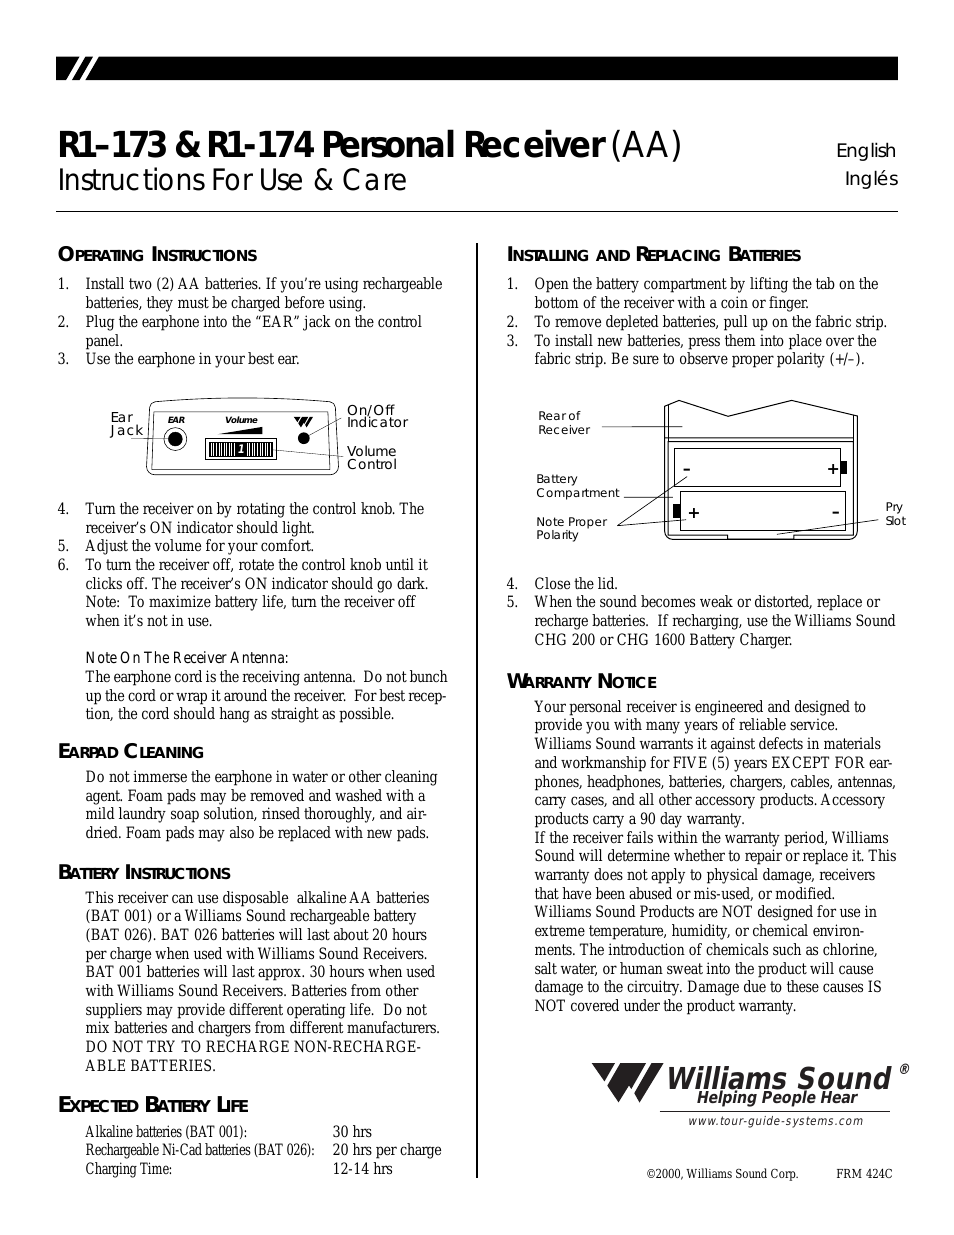 Personal Receiver R1-173